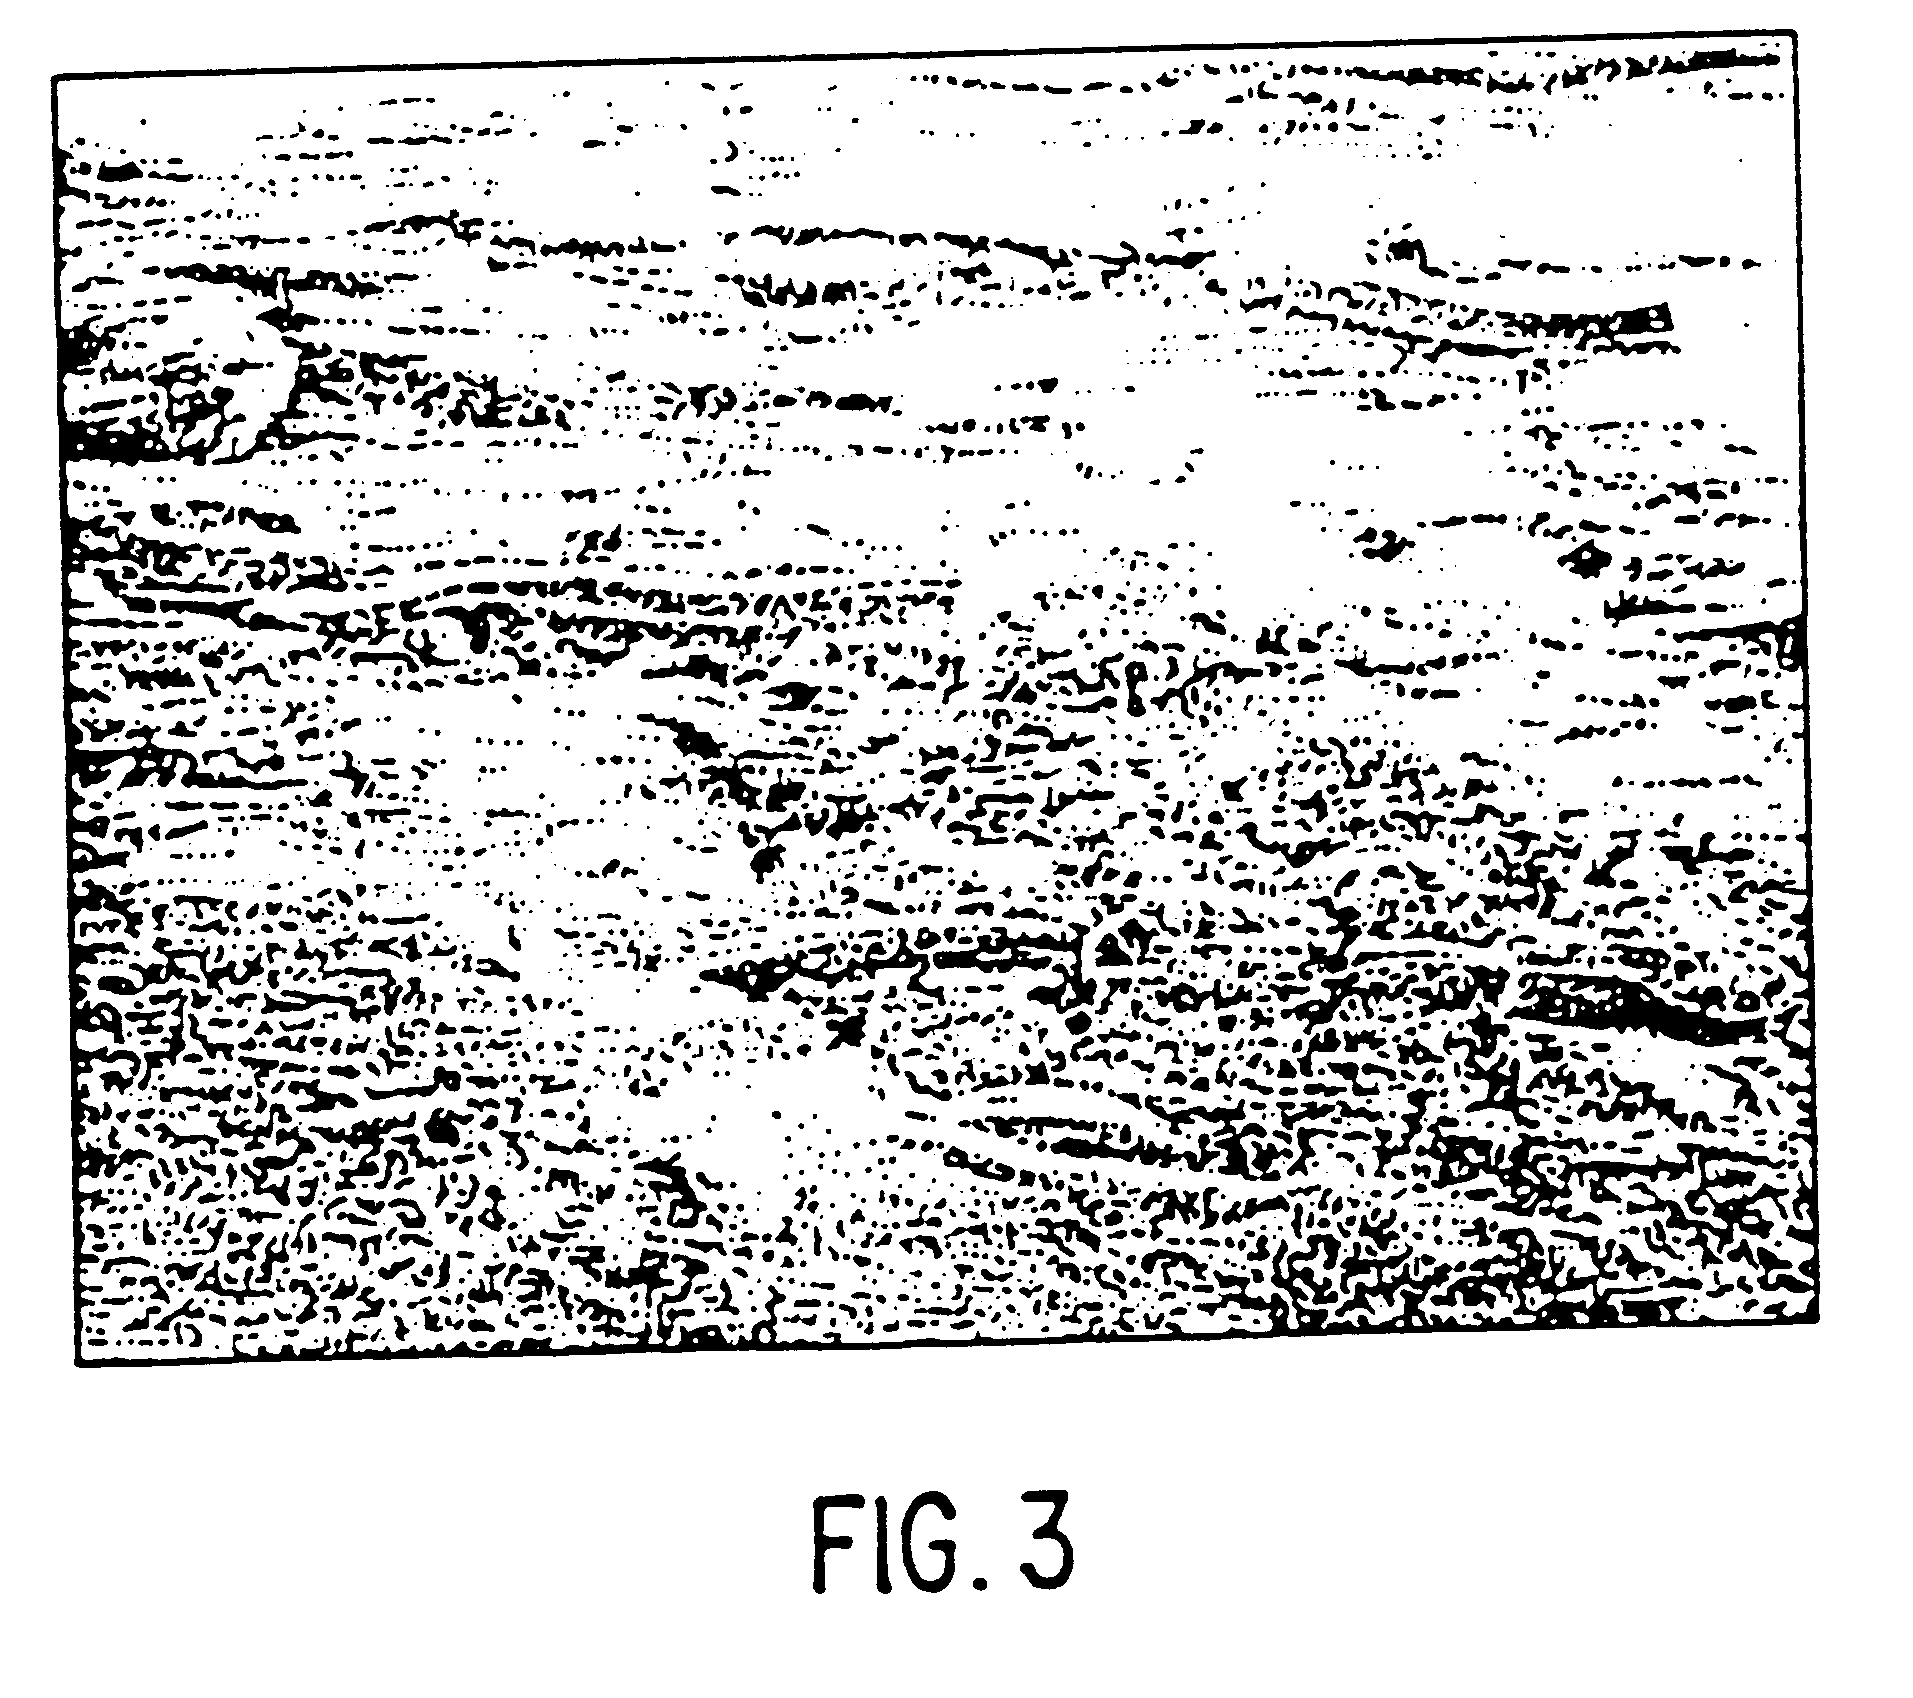 Process of recycling waste polymeric material and an article utilizing the same